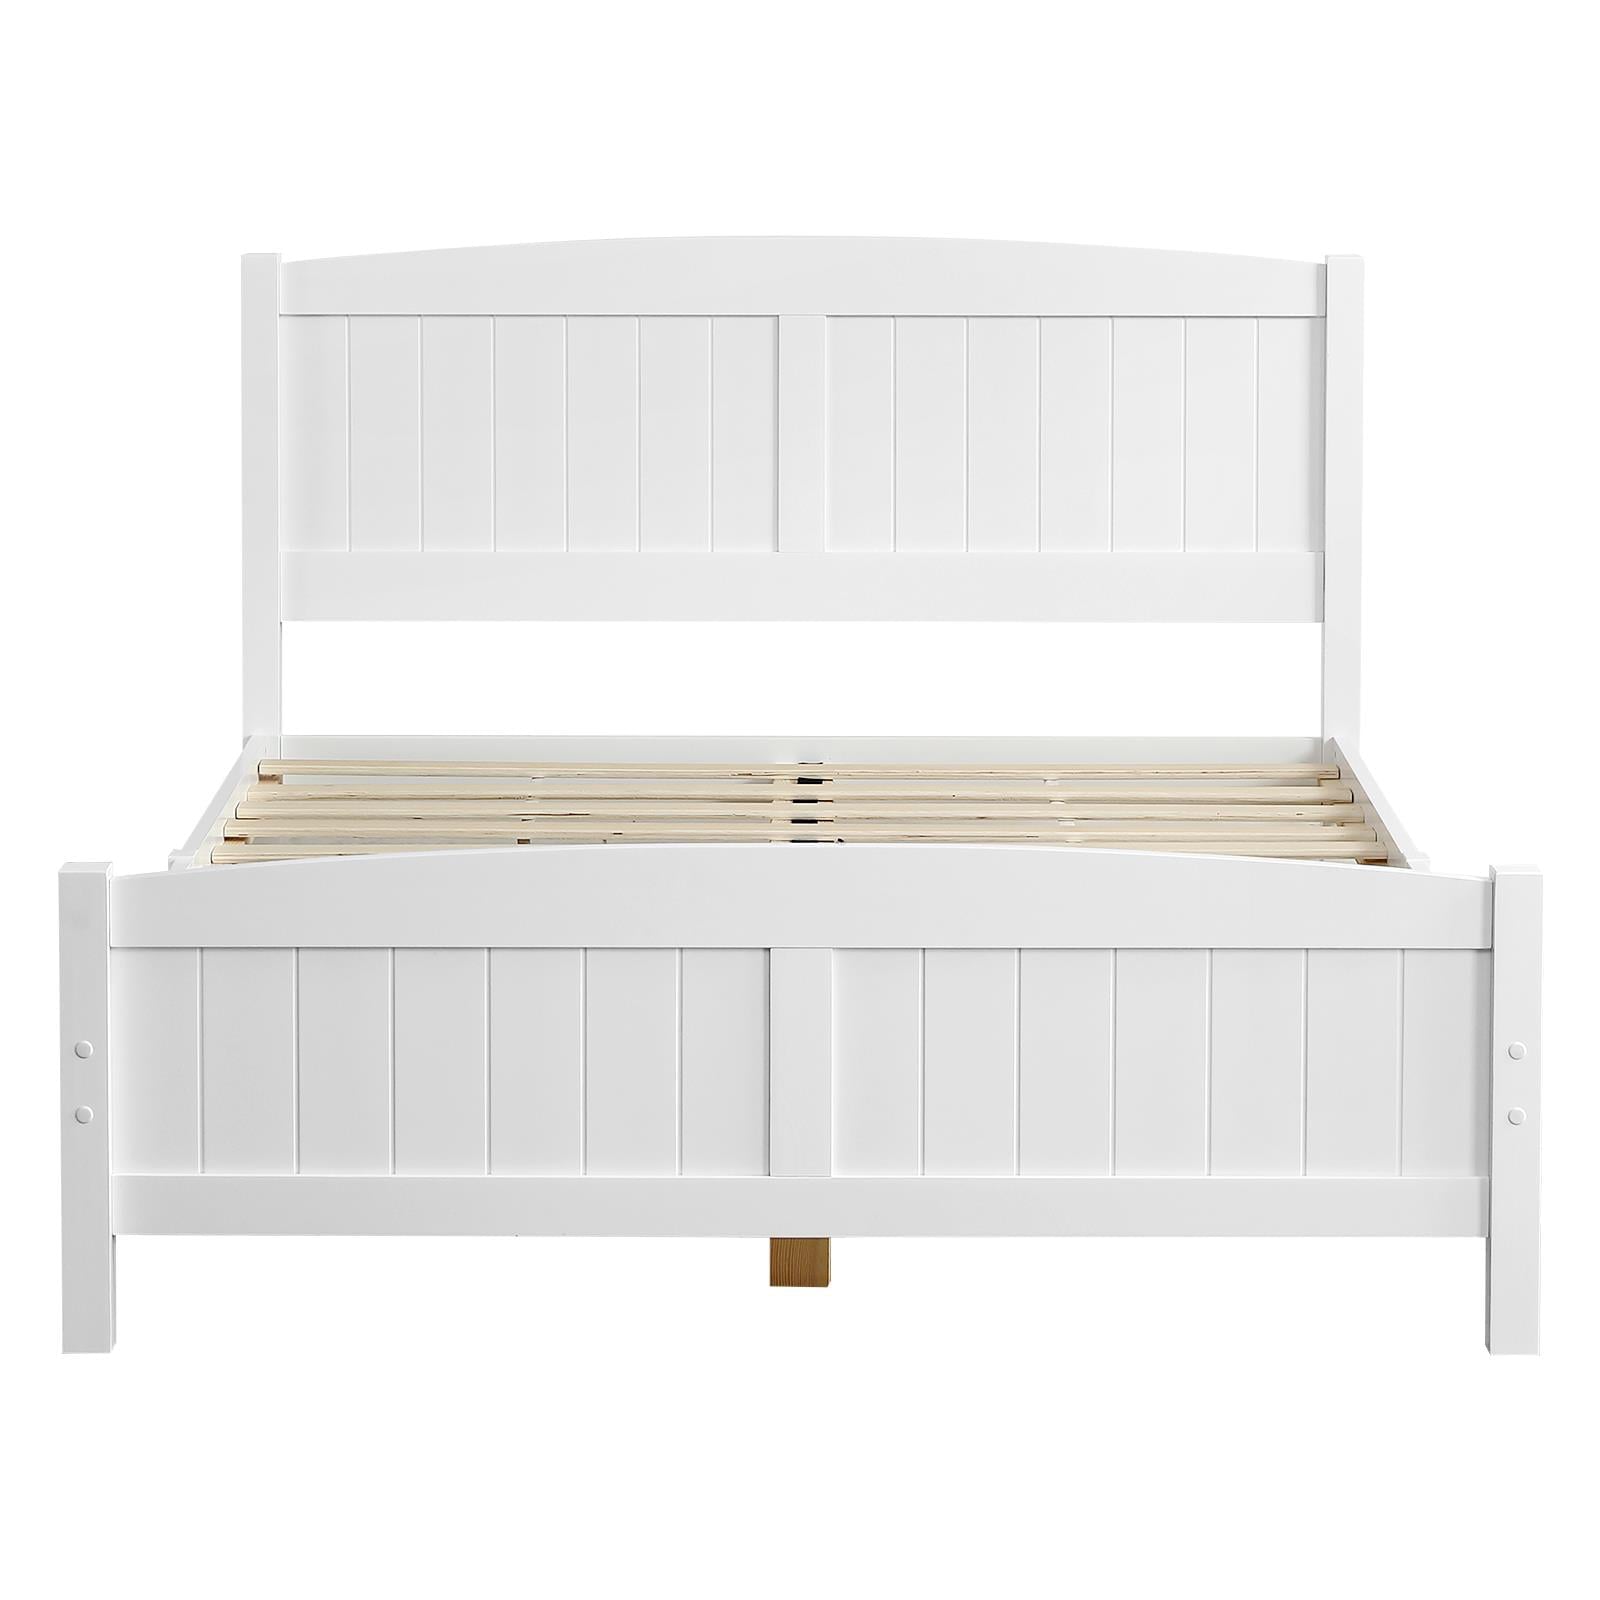 Zimtown Full Bed Frame,Solid Pine Wood Kids Twin Platform Bed Frame, Bedroom Full Bed with Headboard for Adults, White